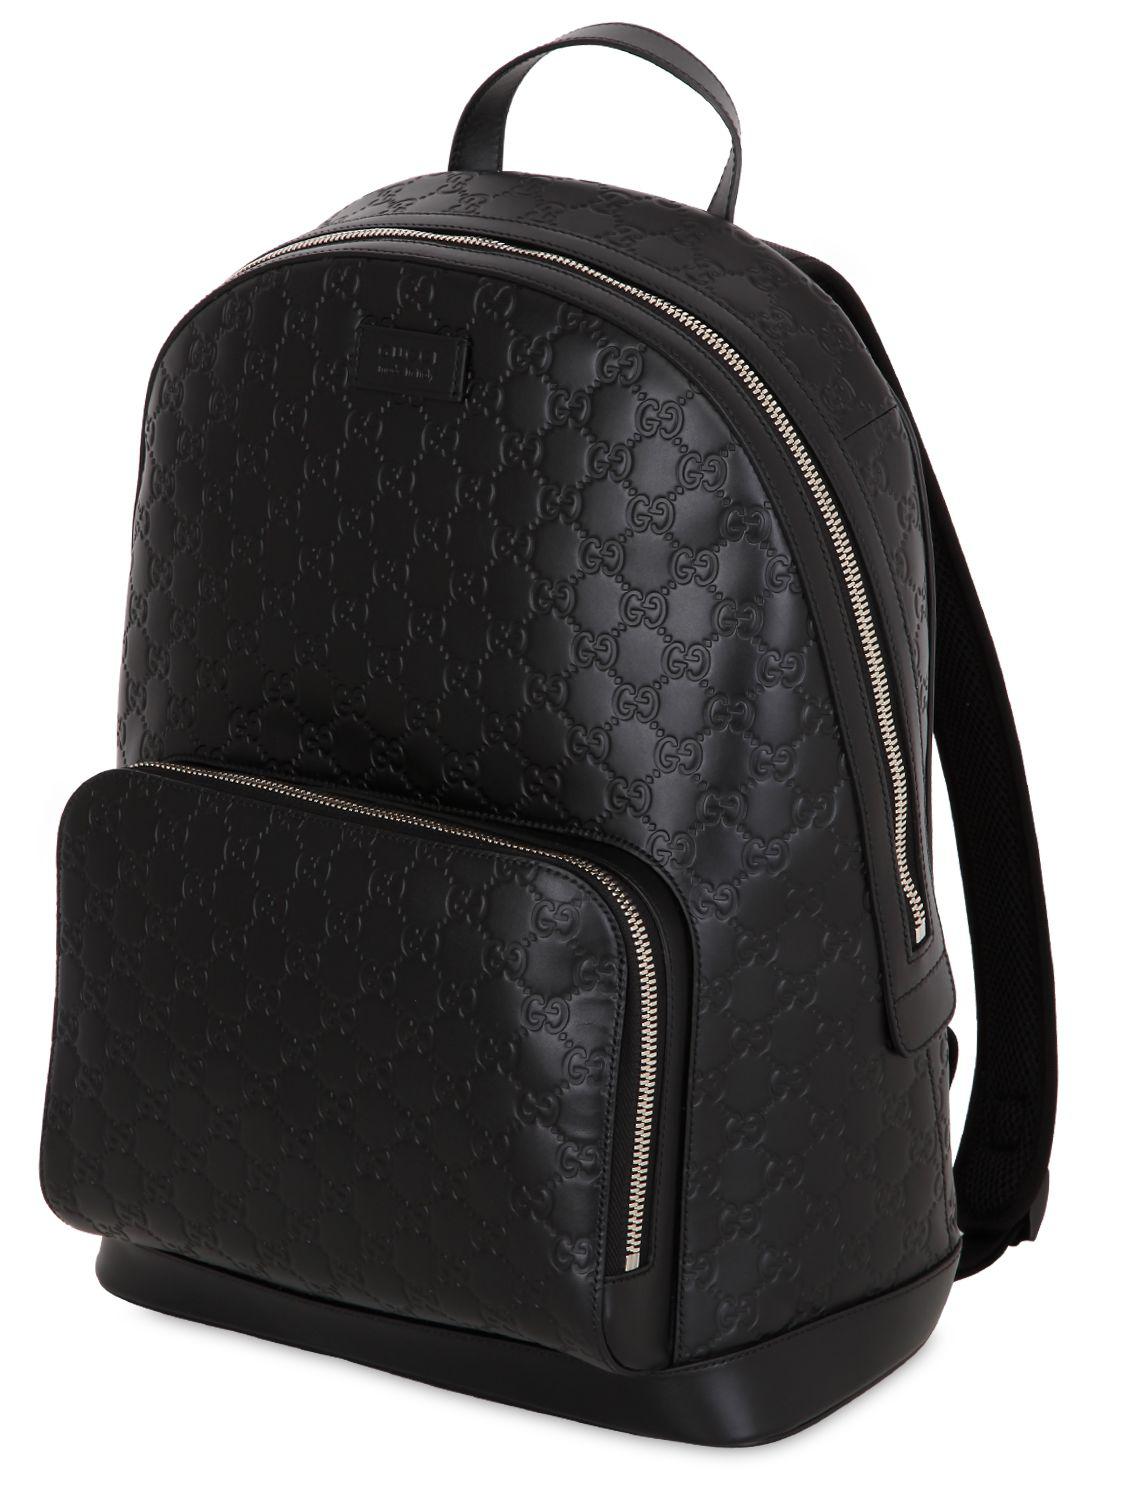 Gucci Signature Leather Backpack in Black for Men - Lyst